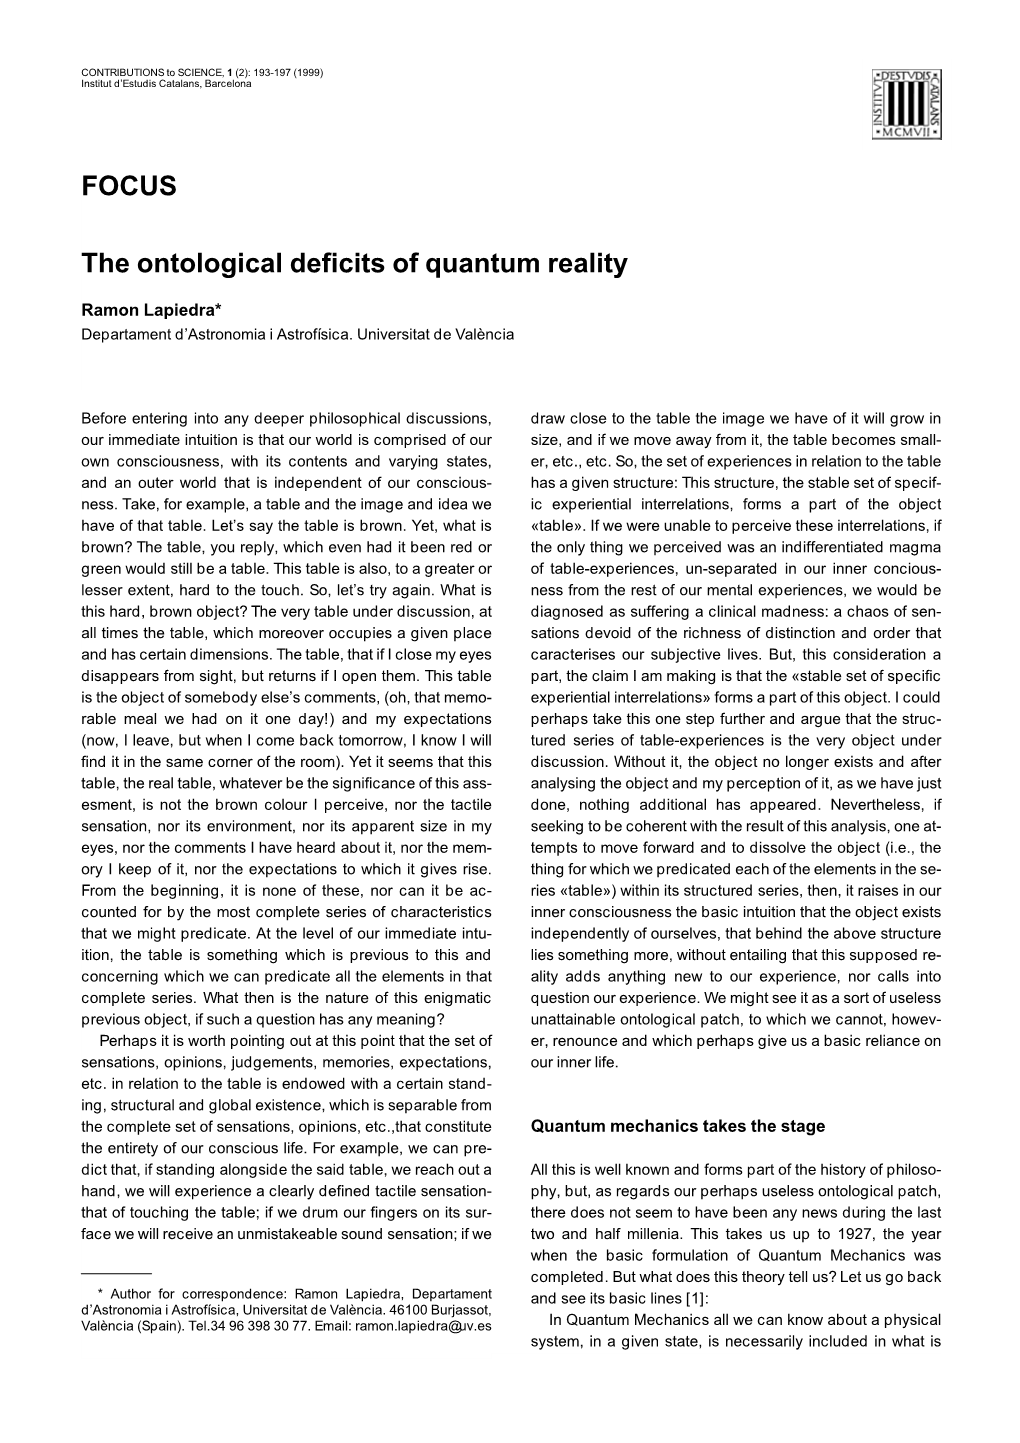 FOCUS the Ontological Deficits of Quantum Reality